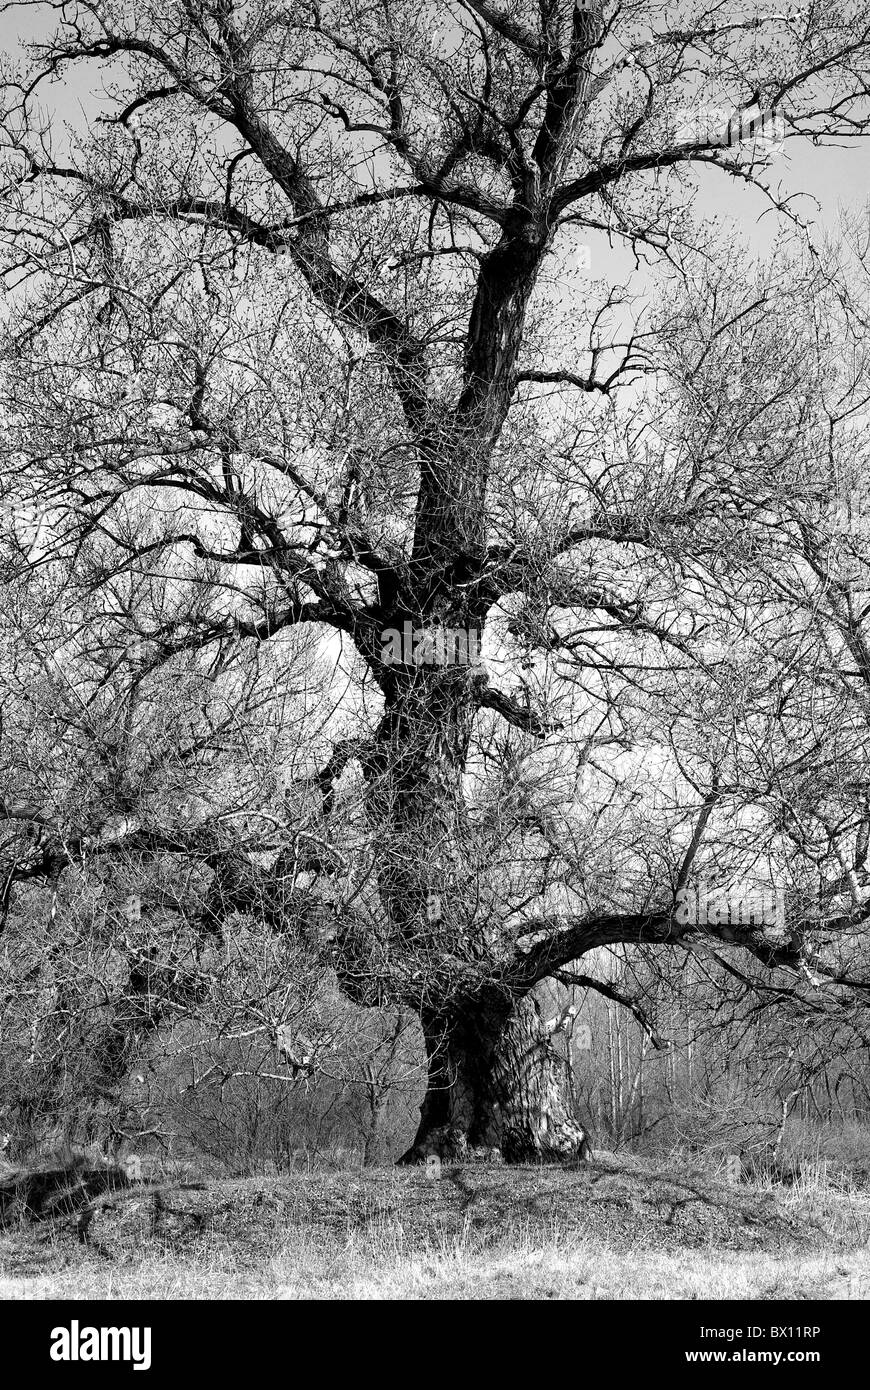 early spring black and white trees without leaves Stock Photo